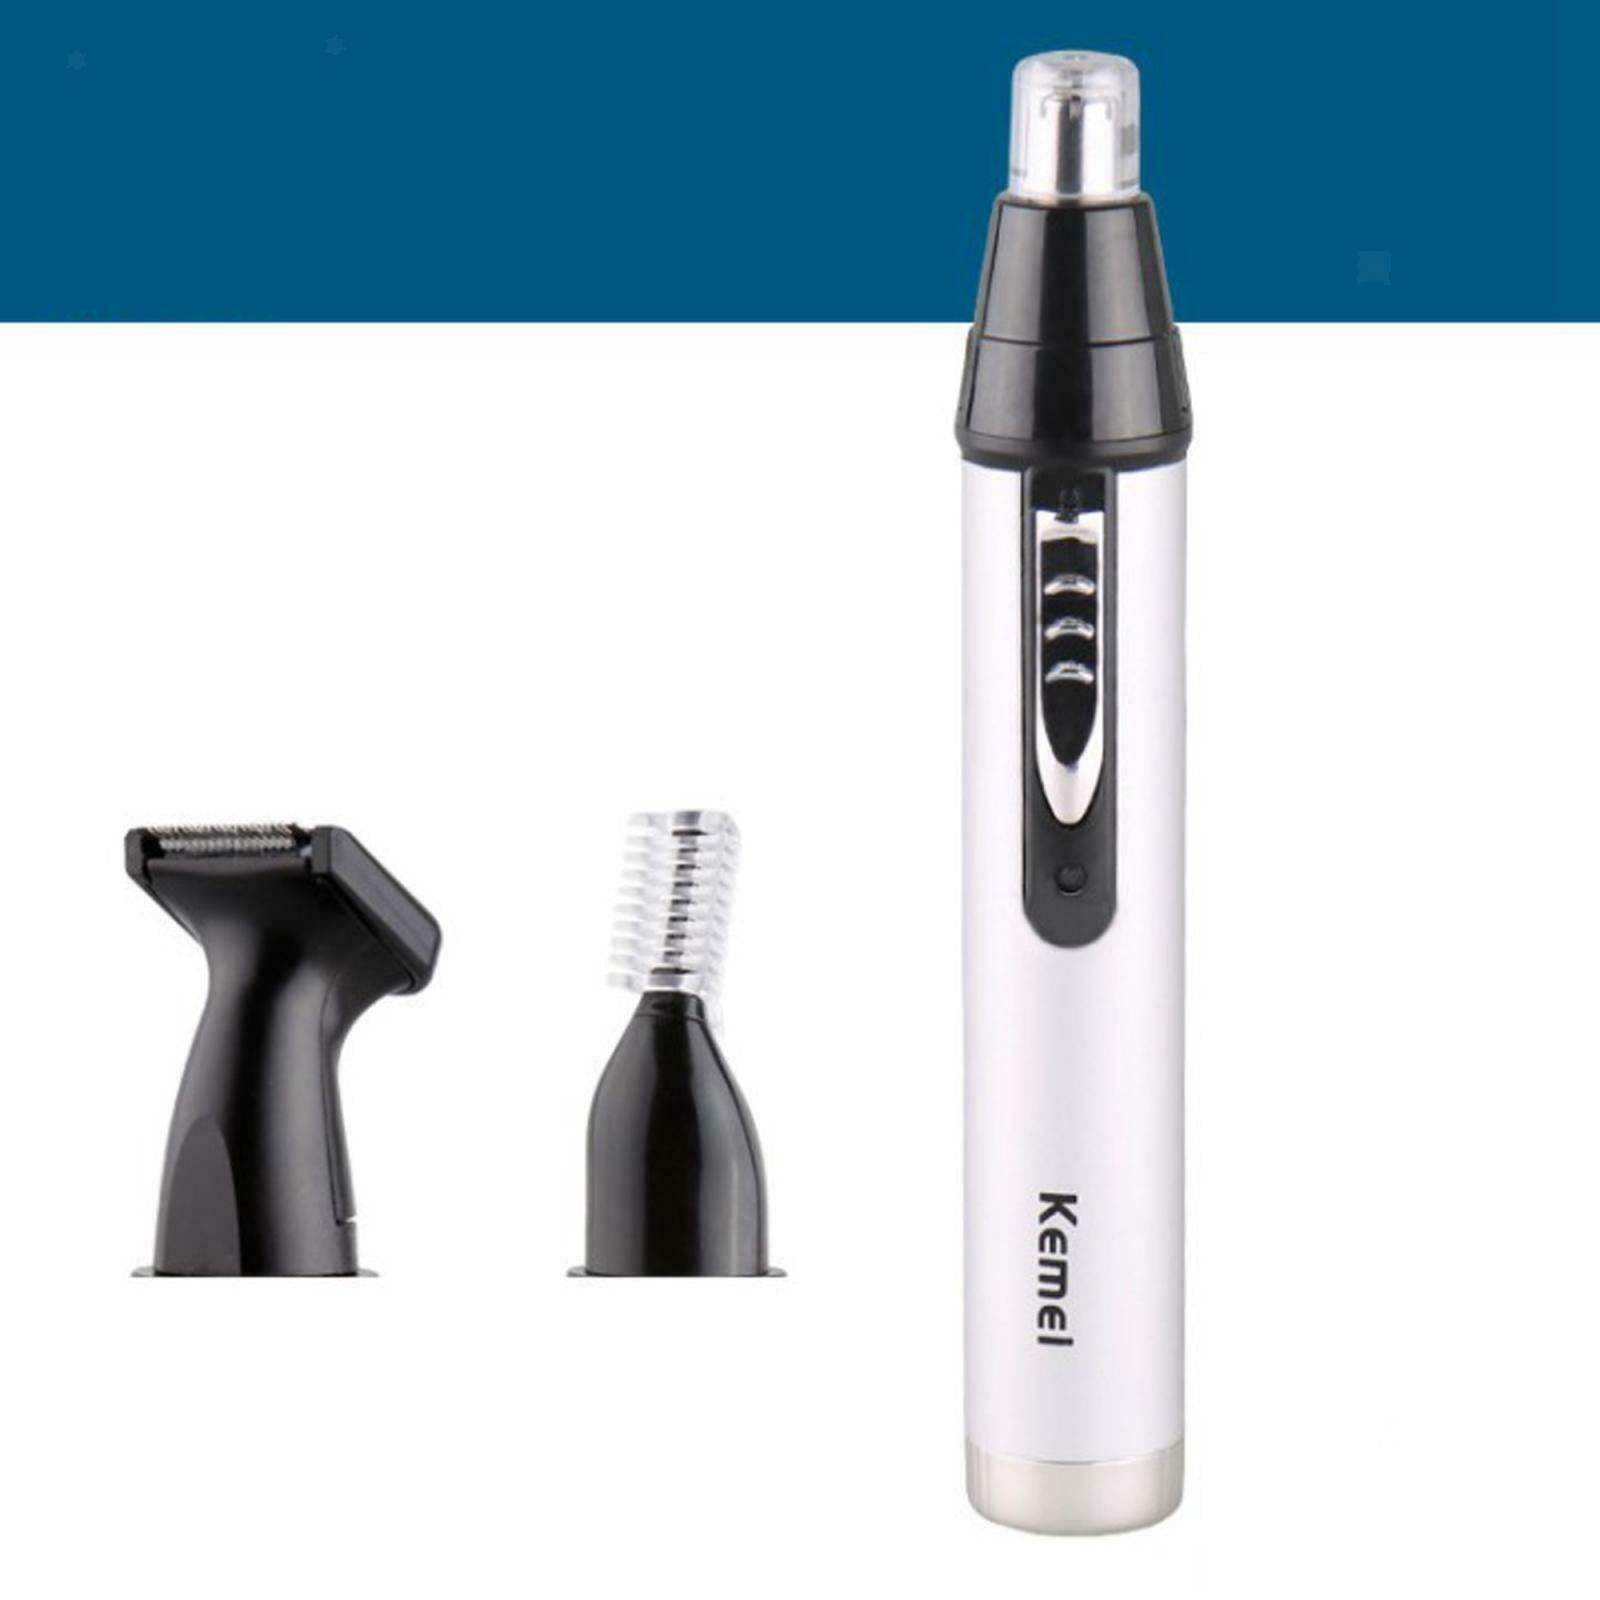 Professional Electric Ear and Nose Hair Trimmer Dual Edge Blades for Men